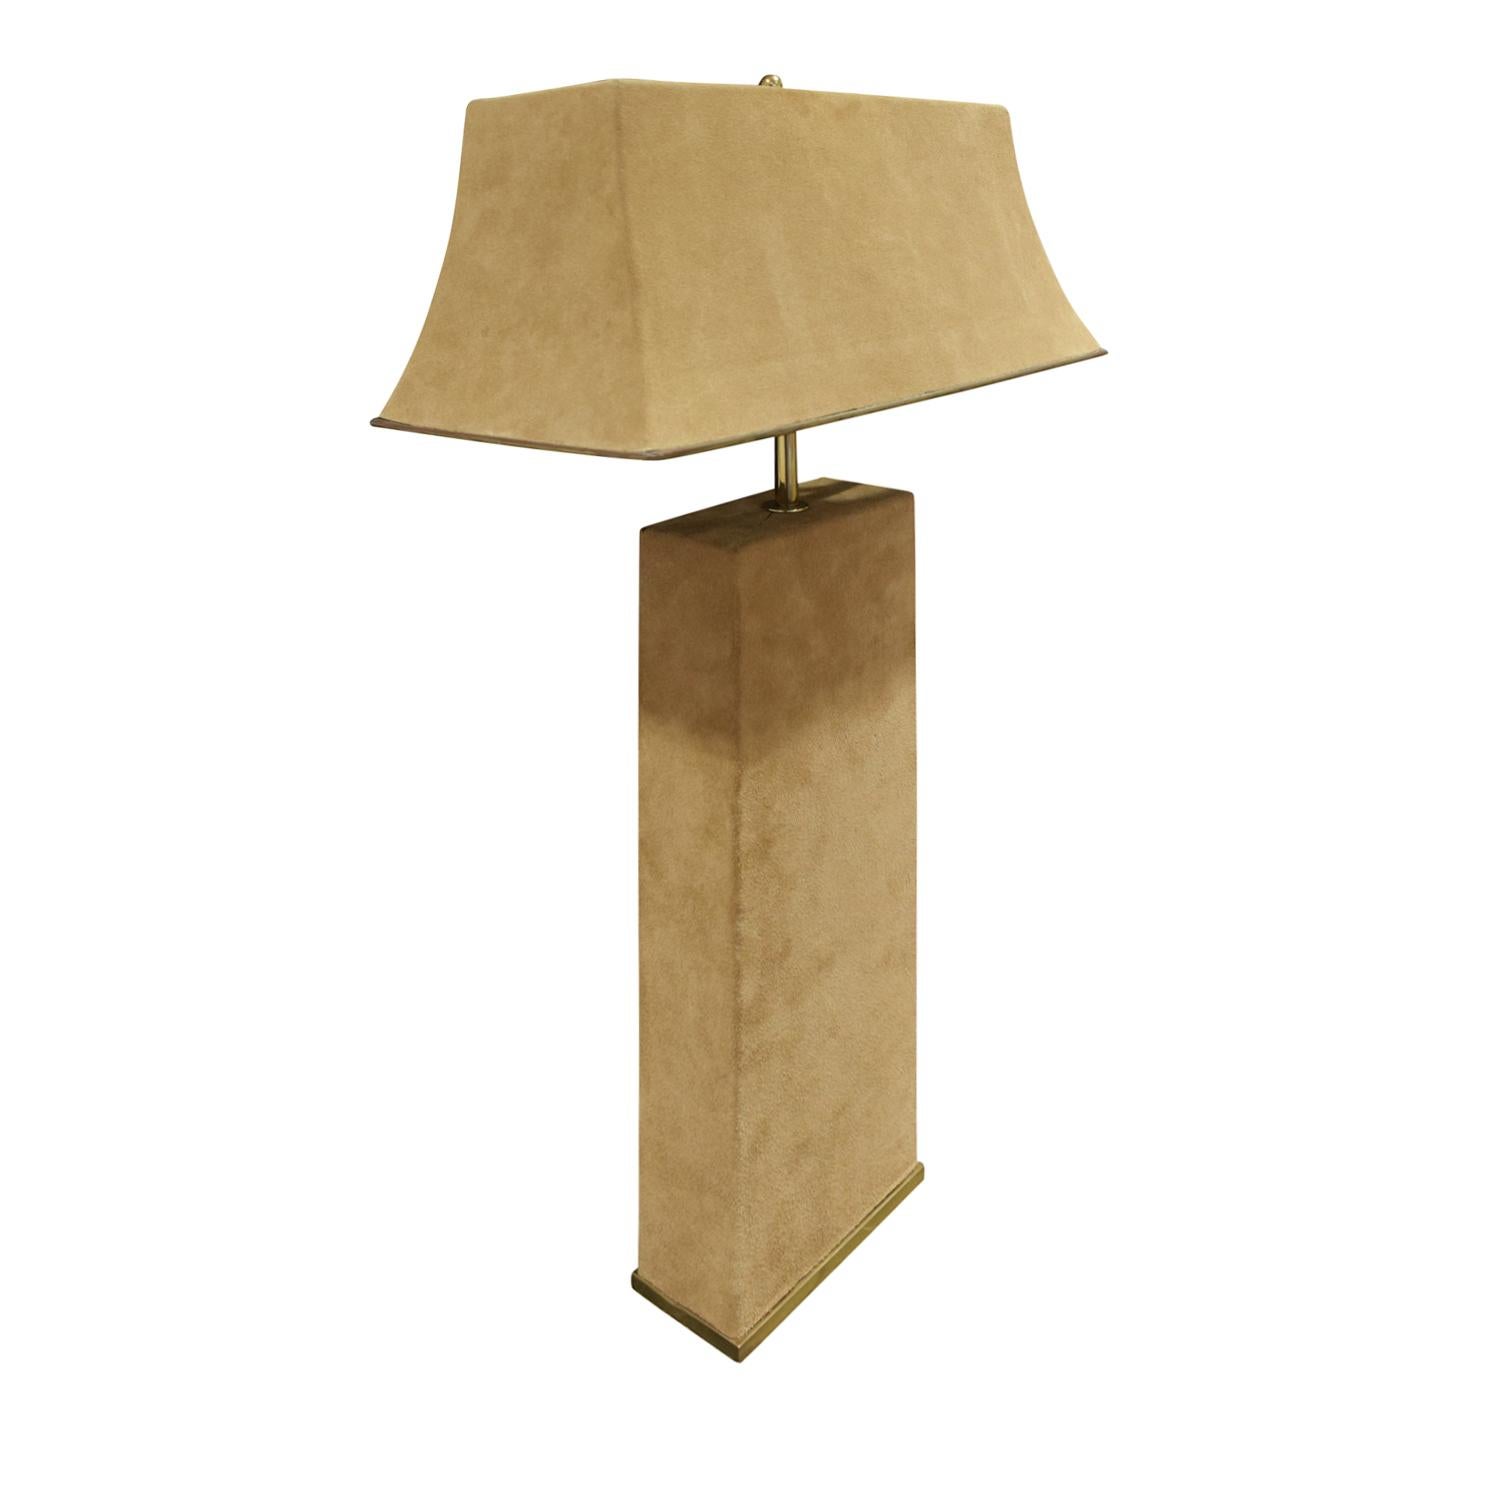 Mid-Century Modern Karl Springer Elegant Pair of Table Lamps in Brass and Beige Suede, 1970s